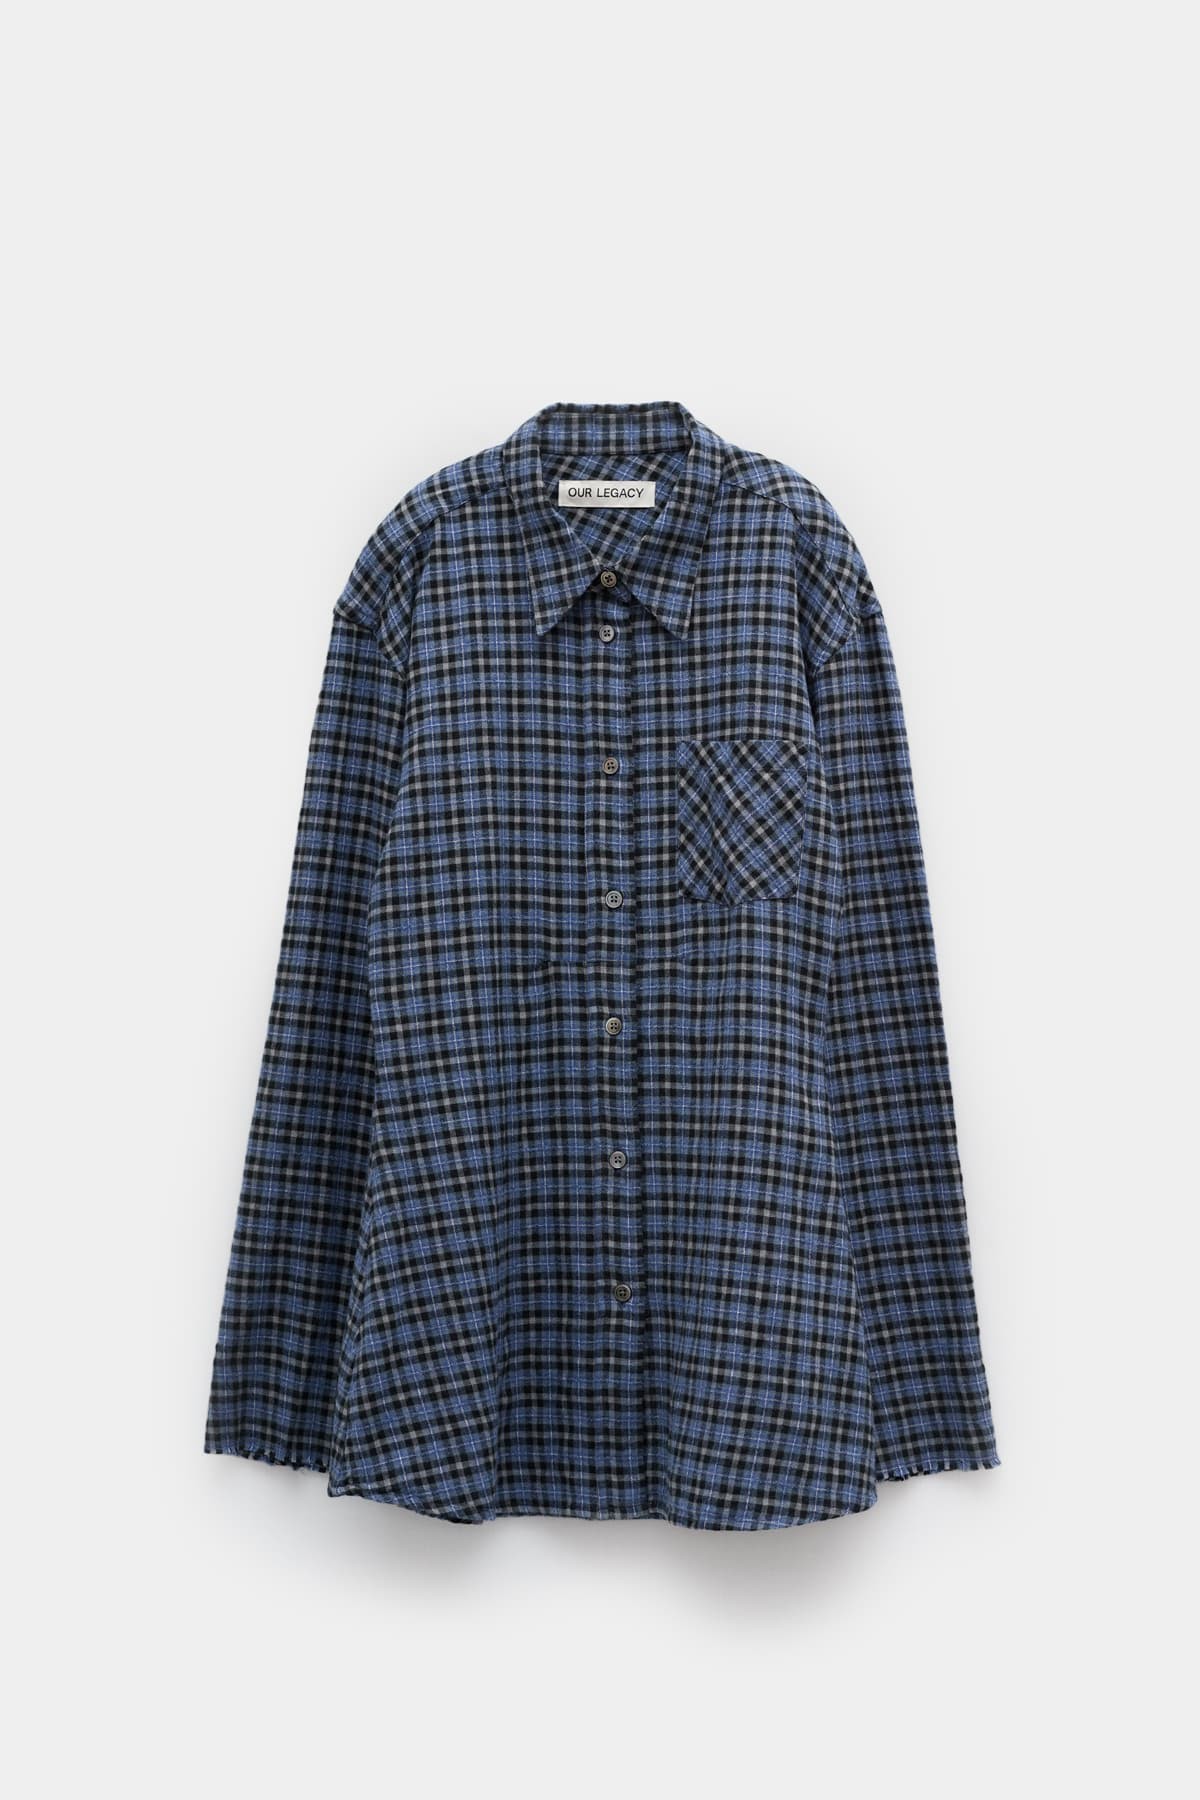 OUR LEGACY BLUE CANTRELL CHECK DAISY SHIRT IAMNUE